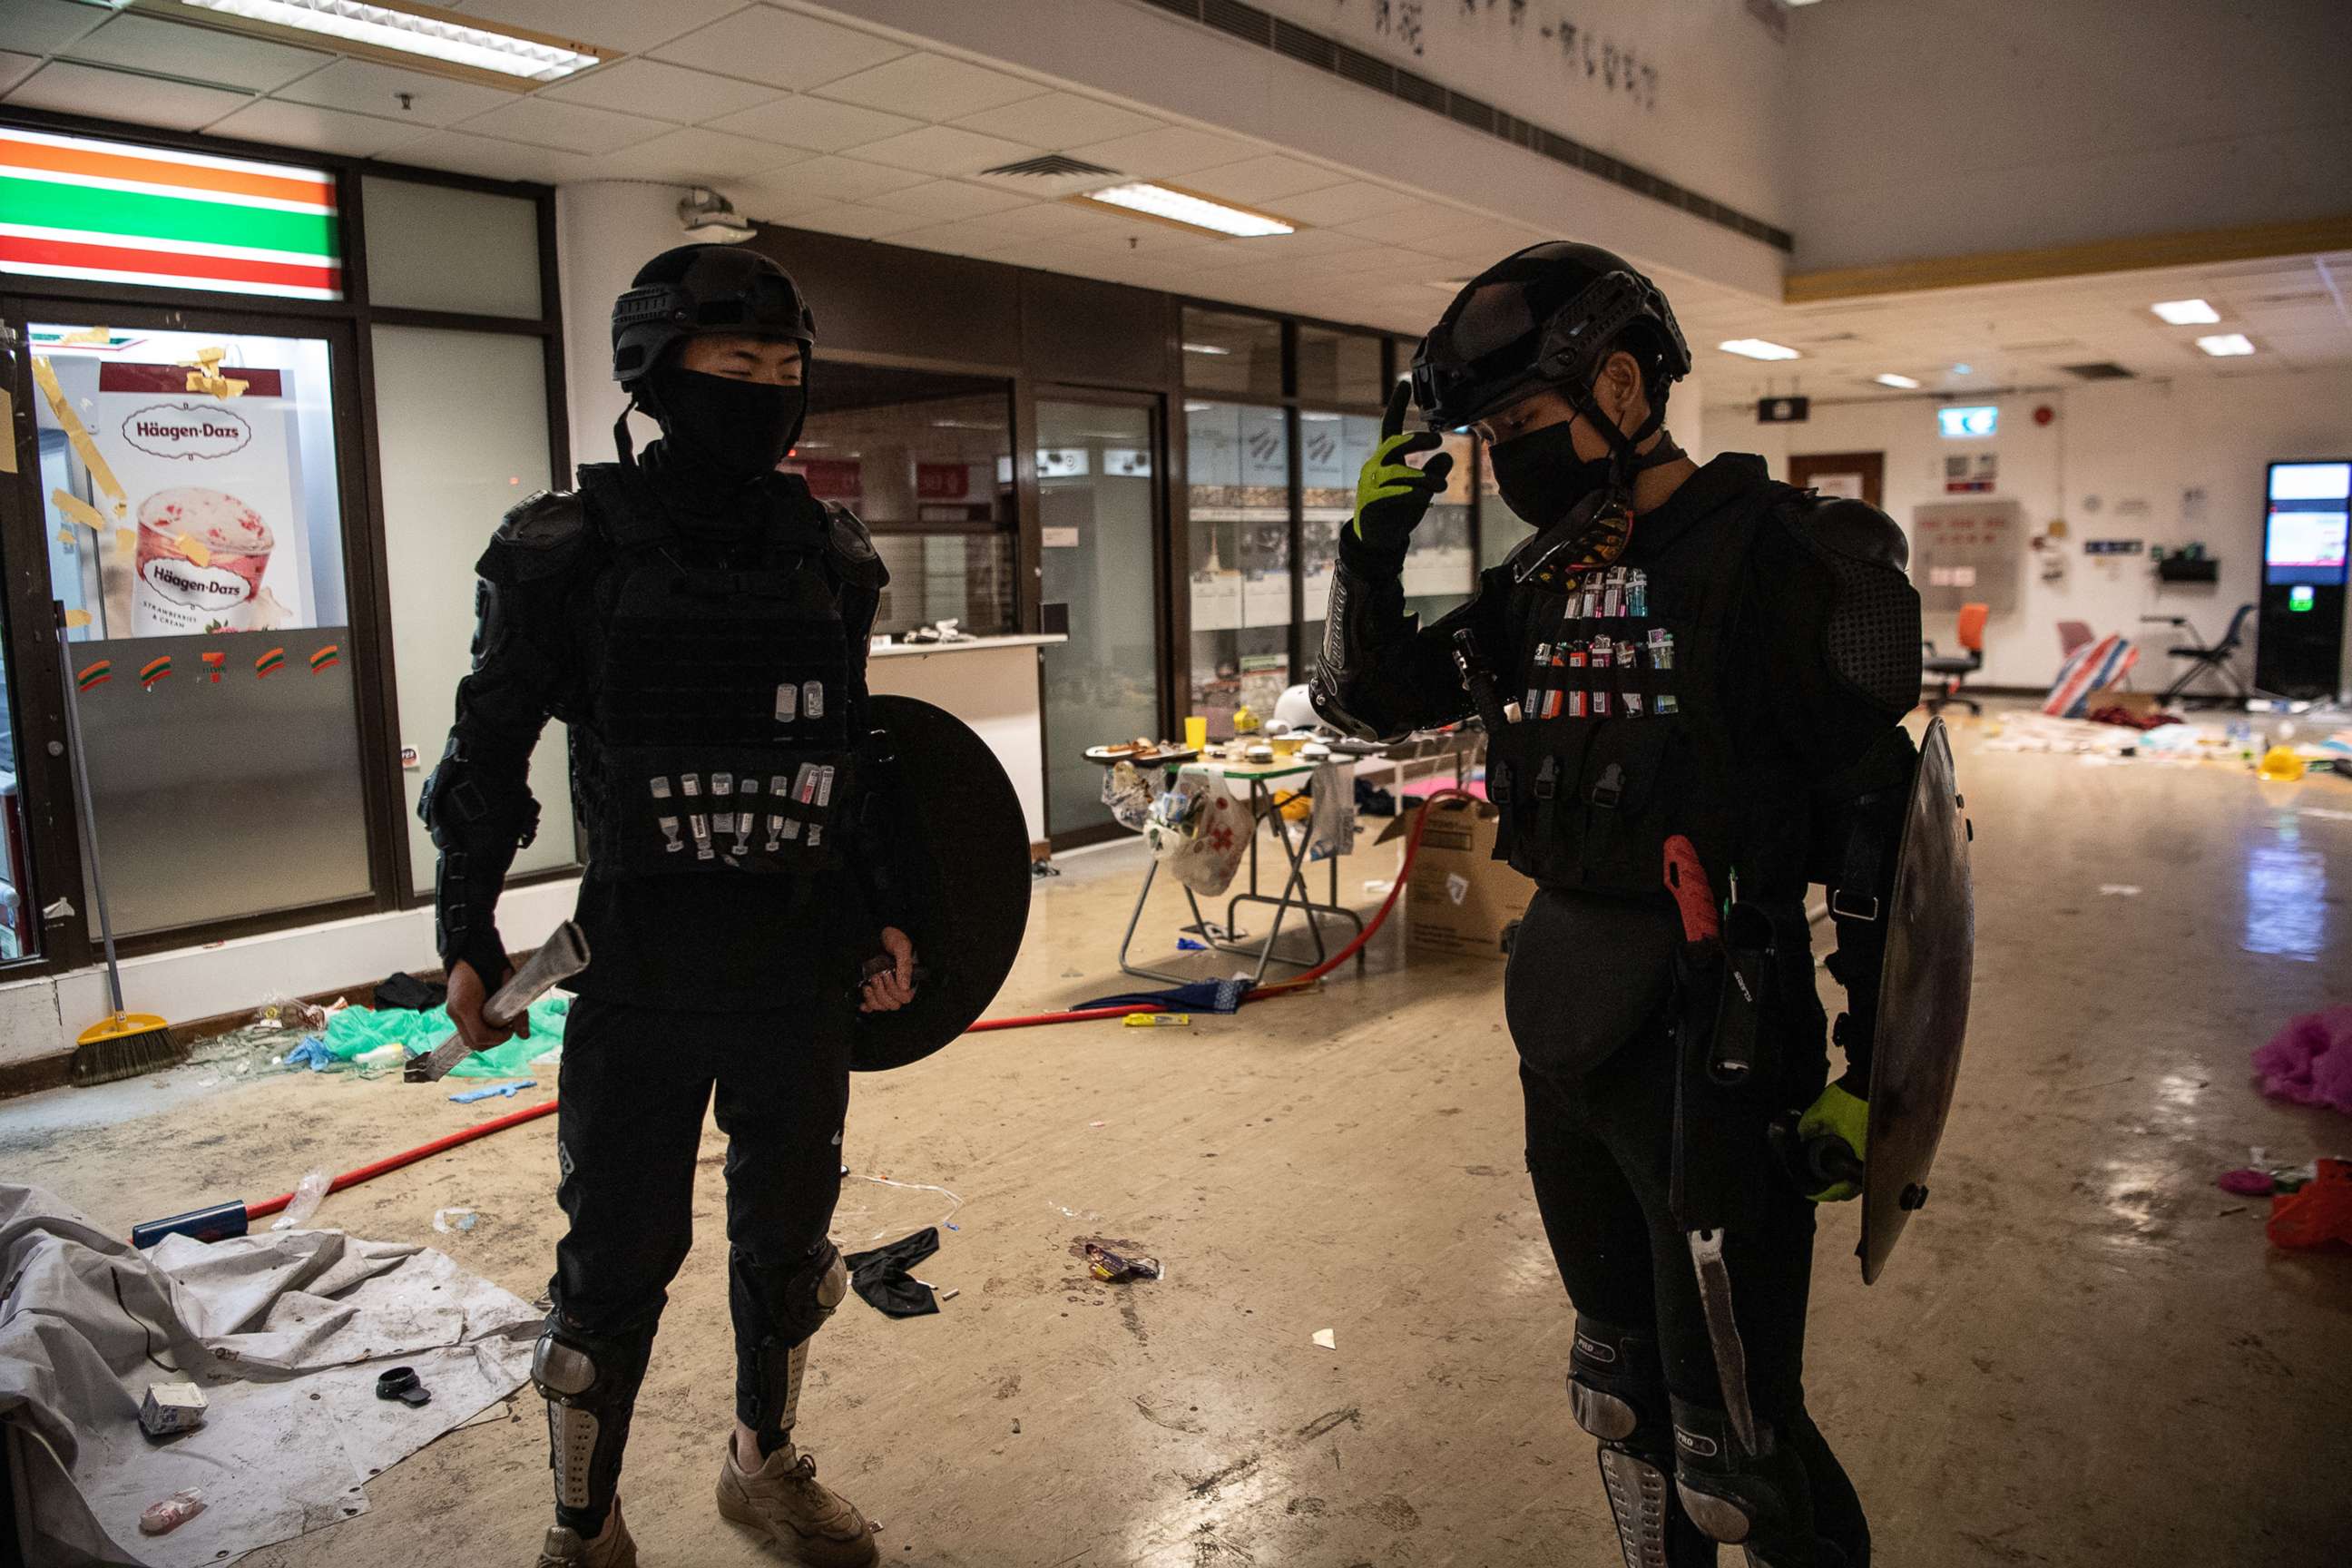 PHOTO: Anti-government protesters with their faces covered stand at Hong Kong Polytechnic University, which has been taken over by anti-government protesters, on Nov. 21, 2019, in Hong Kong.